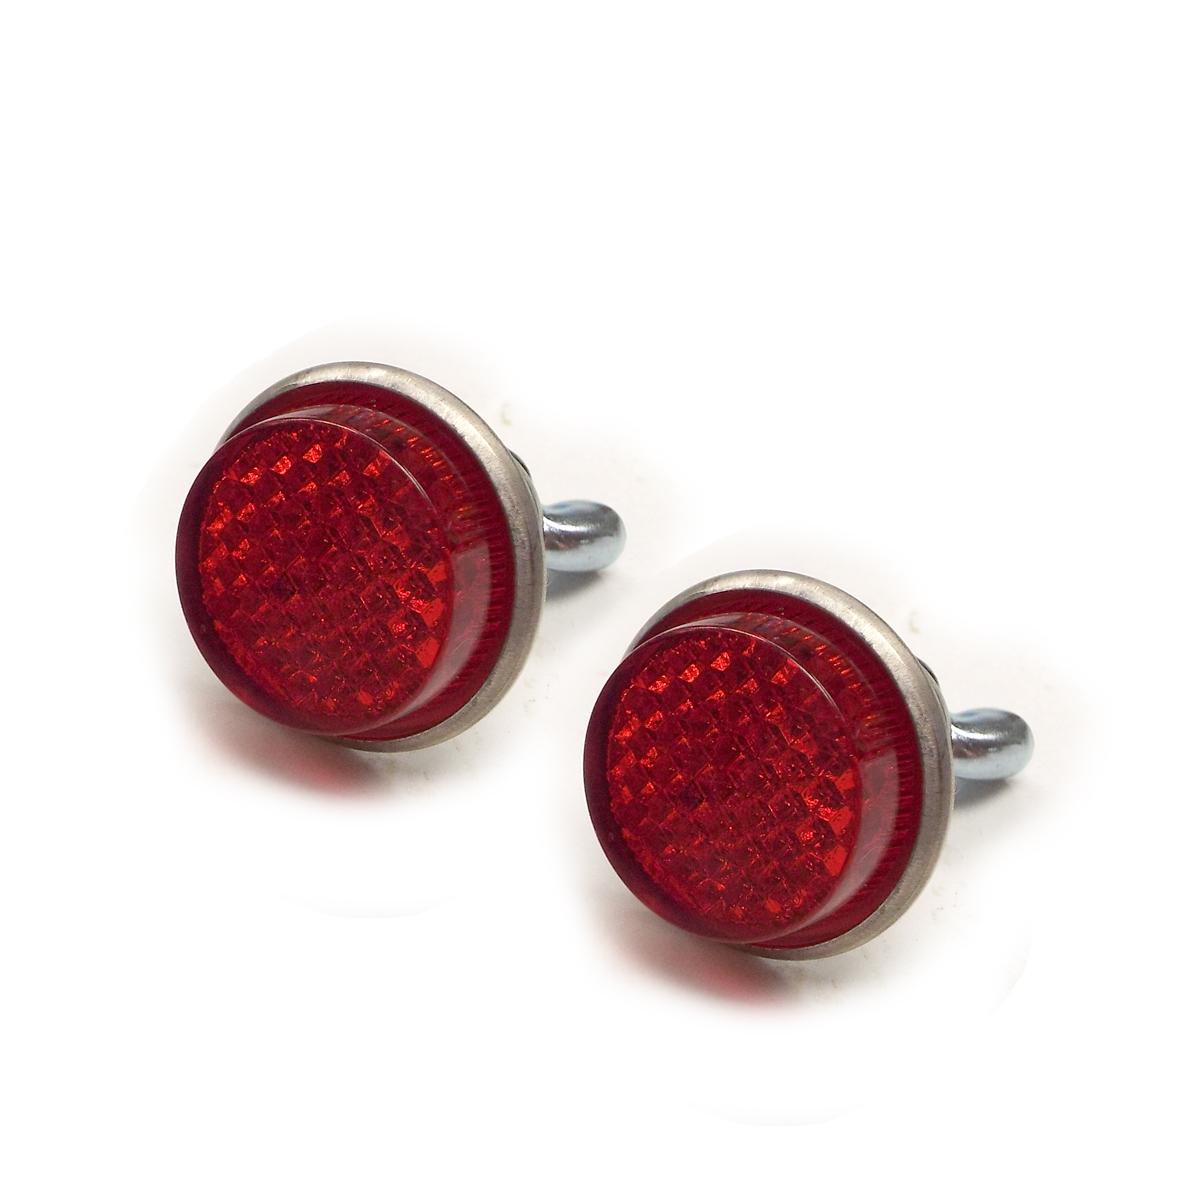 Reflector License Plate Fasteners Red Plastic Reflective Jewels Chevrolet and GMC Pickup Truck